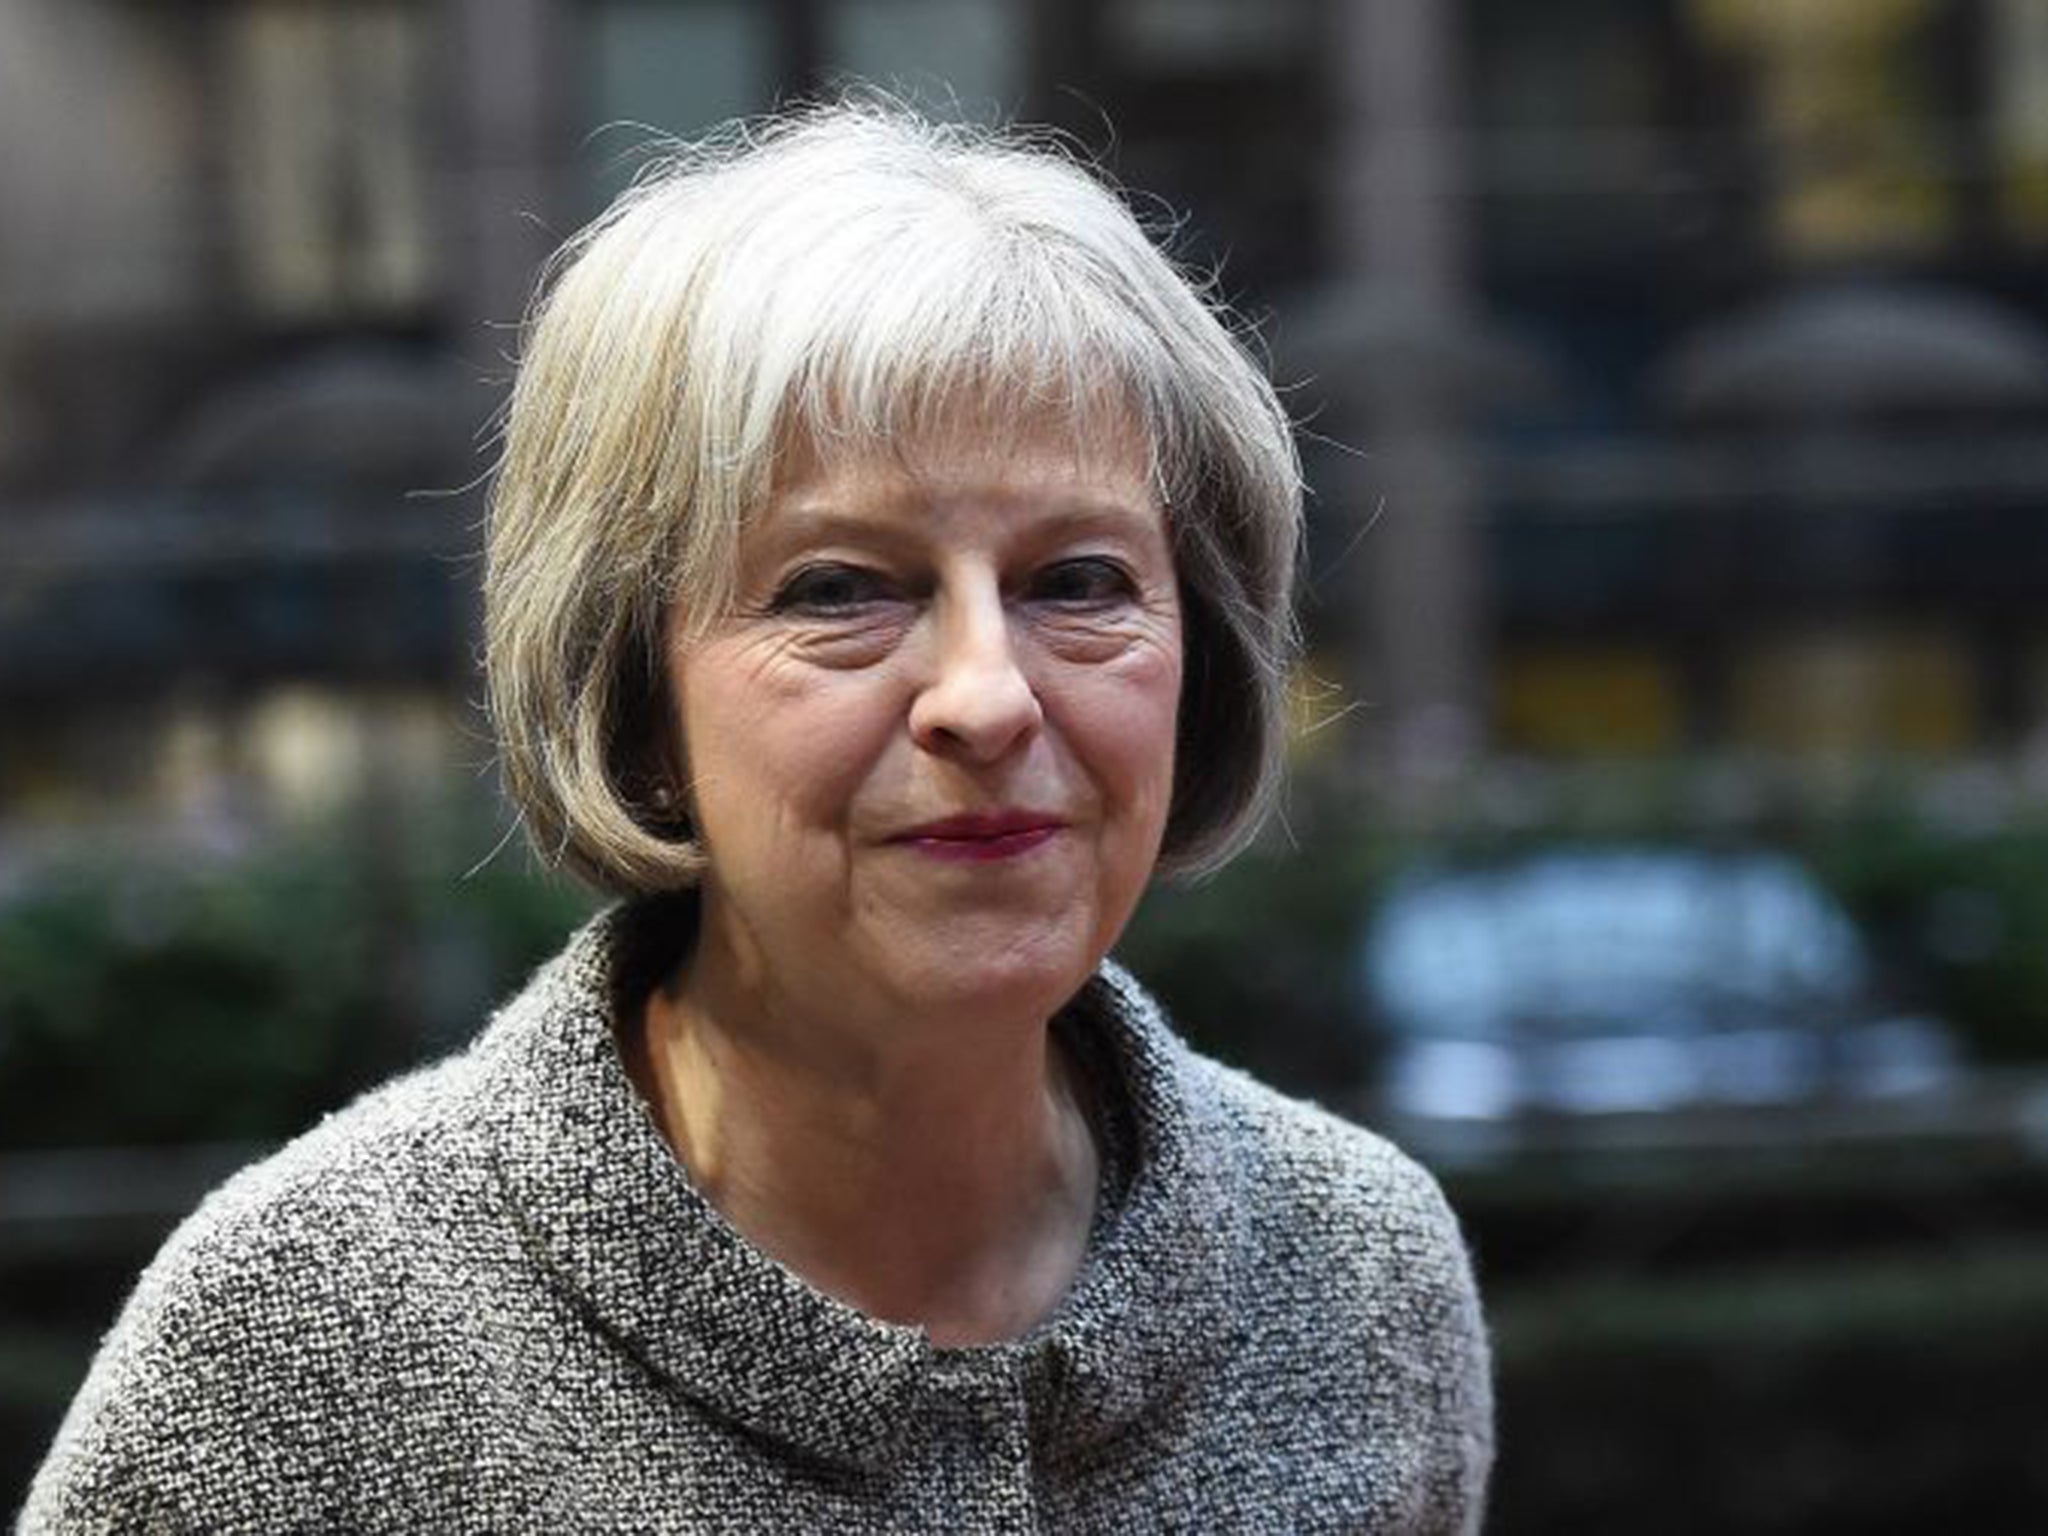 Ms May said tackling terrorism is the 'challenge of our generation'